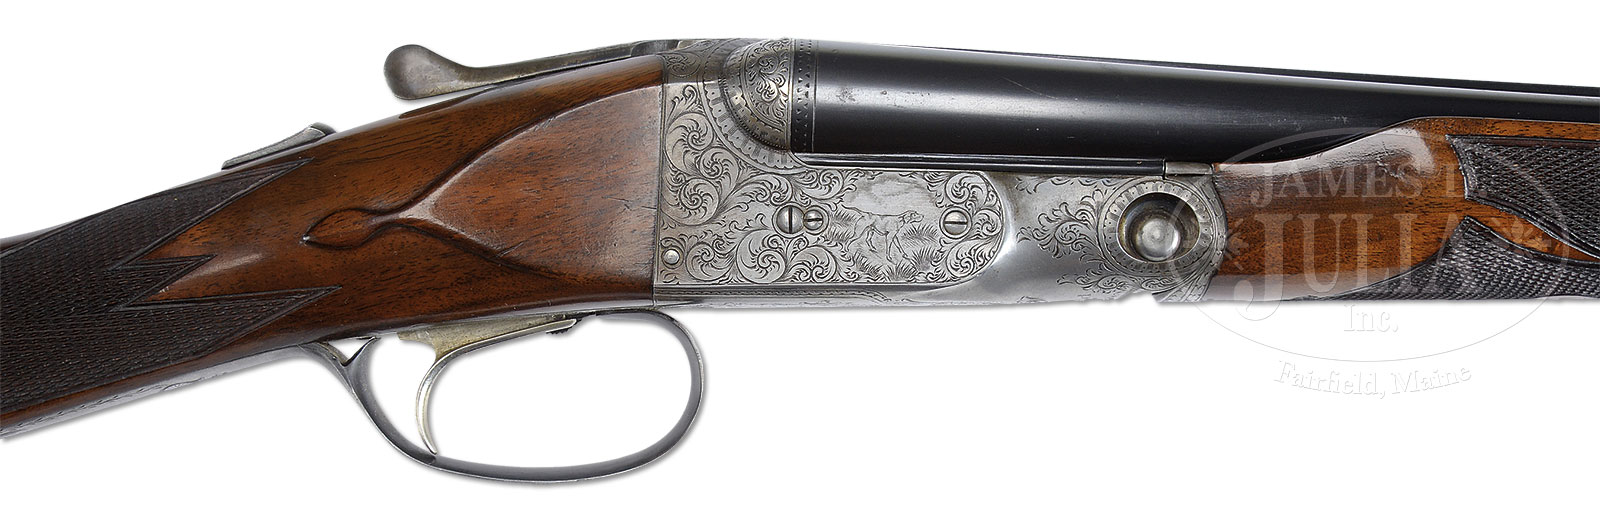 SUPER RARE AND DESIRABLE 28 GAUGE PARKER “DHE” SKEET GUN WITH STRAIGHT GRIP,SINGLE TRIGGER AND BEAVERTAIL FOREND.